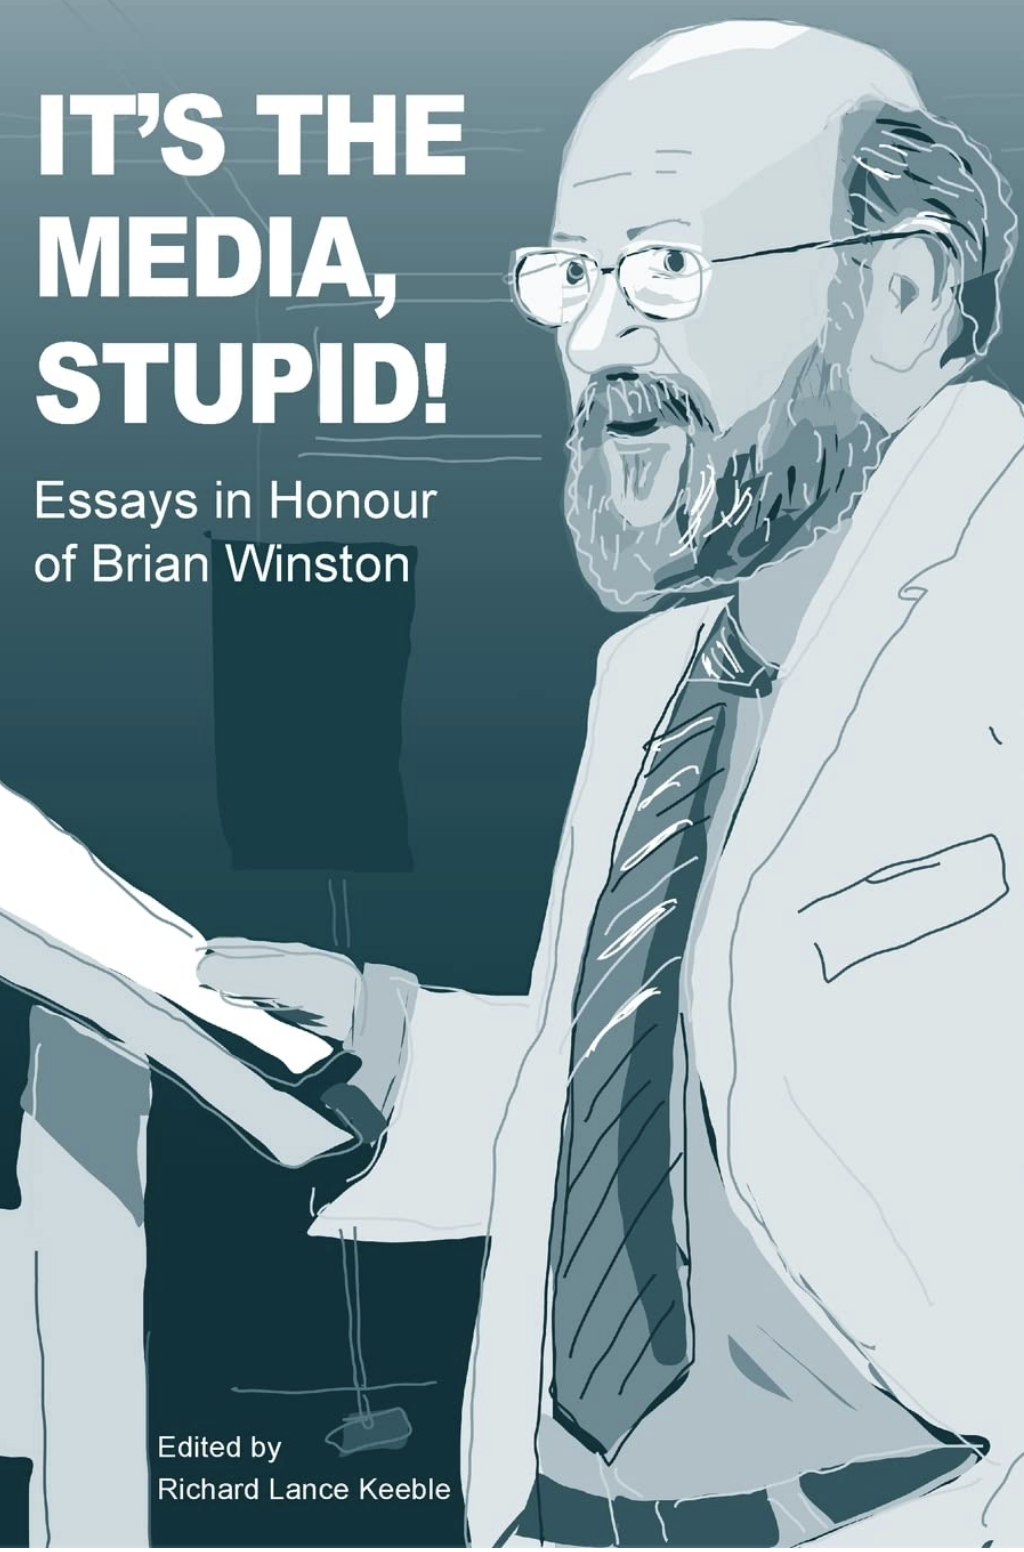 “It’s the Media Stupid!” Essays in honour of Brian Winston 2022